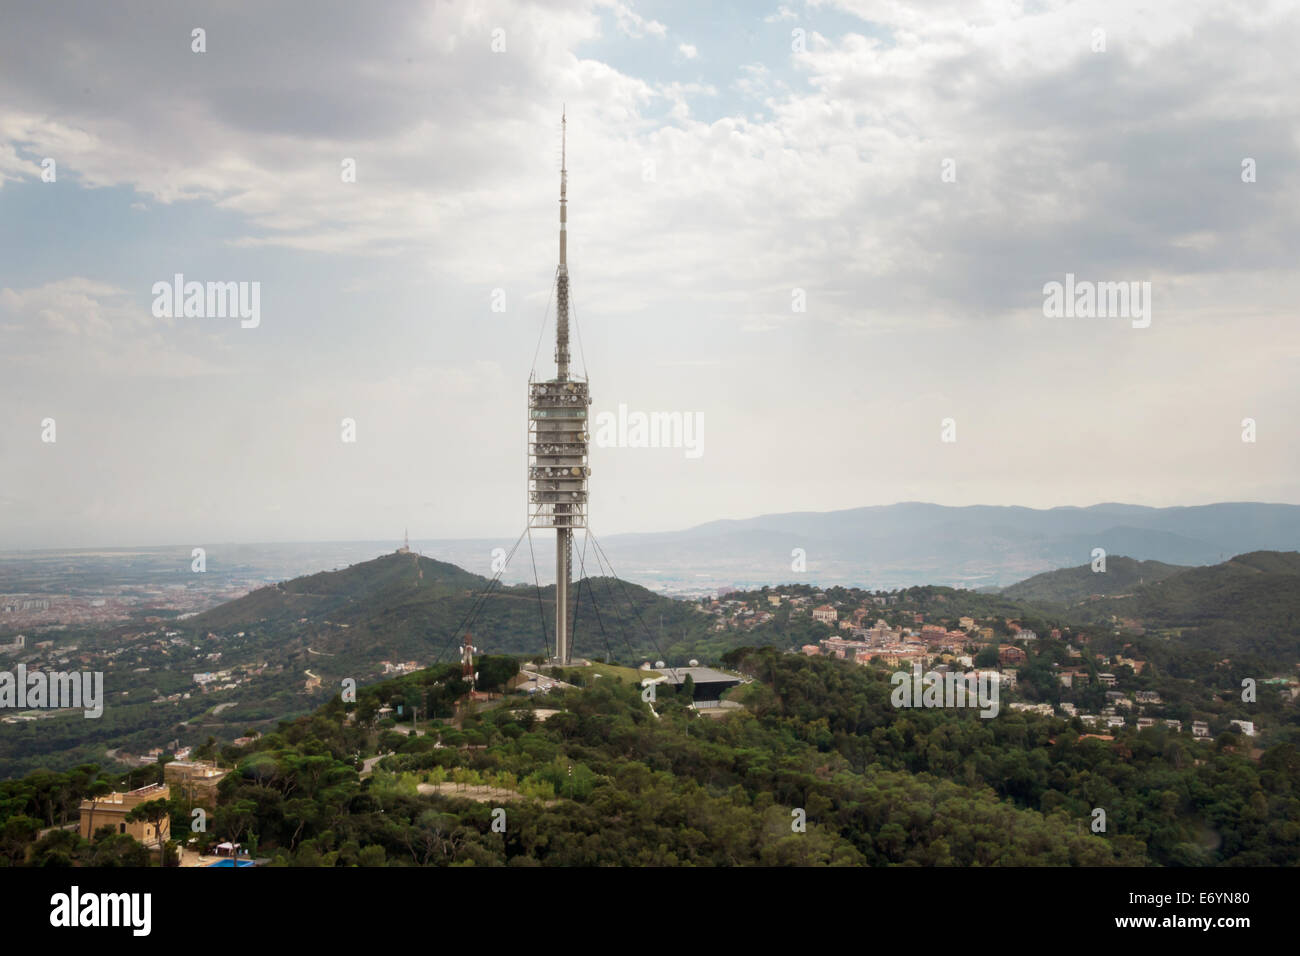 Torre de Collserola television tower, the highest point in Barcelona, Spain, Europe Stock Photo